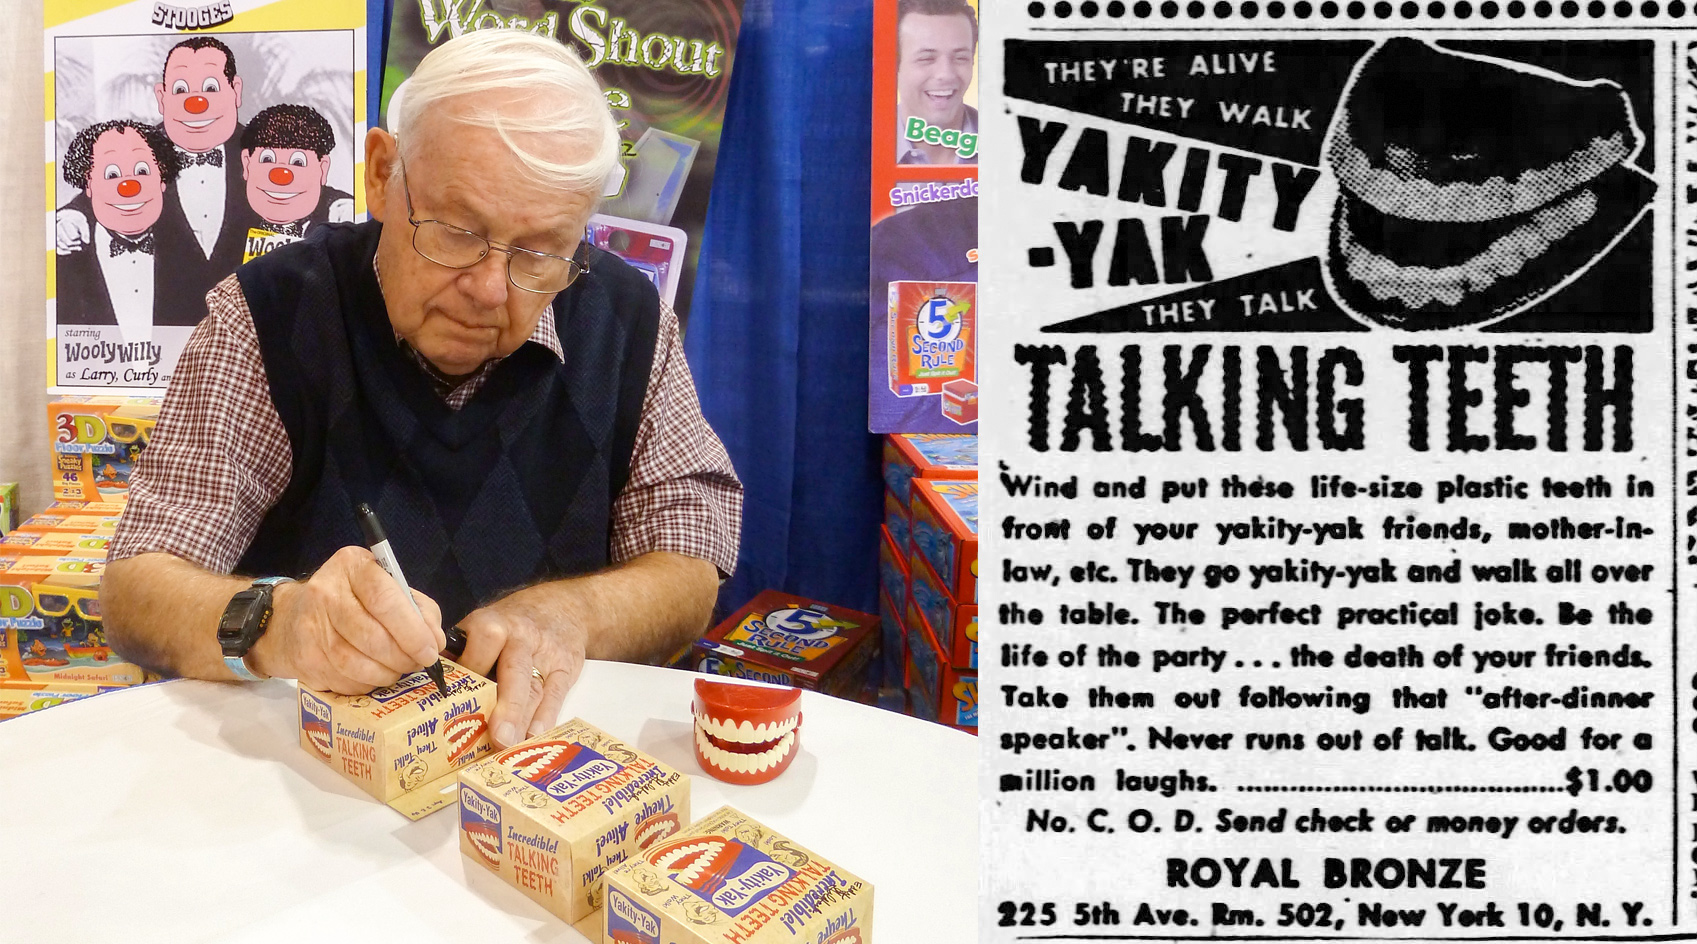 Left: Toy inventor Eddy Goldfarb wearing a red plaid shirt and blue sweater autographs his most famous creation, motorized teeth called the Yakity Yak Talking Teeth, at a toy convention in 2010. Right: A black and white newspaper advertisement from 1949 for Yakity Yak Talking Teeth, a set of motorized teeth sold as a novelty gift. 